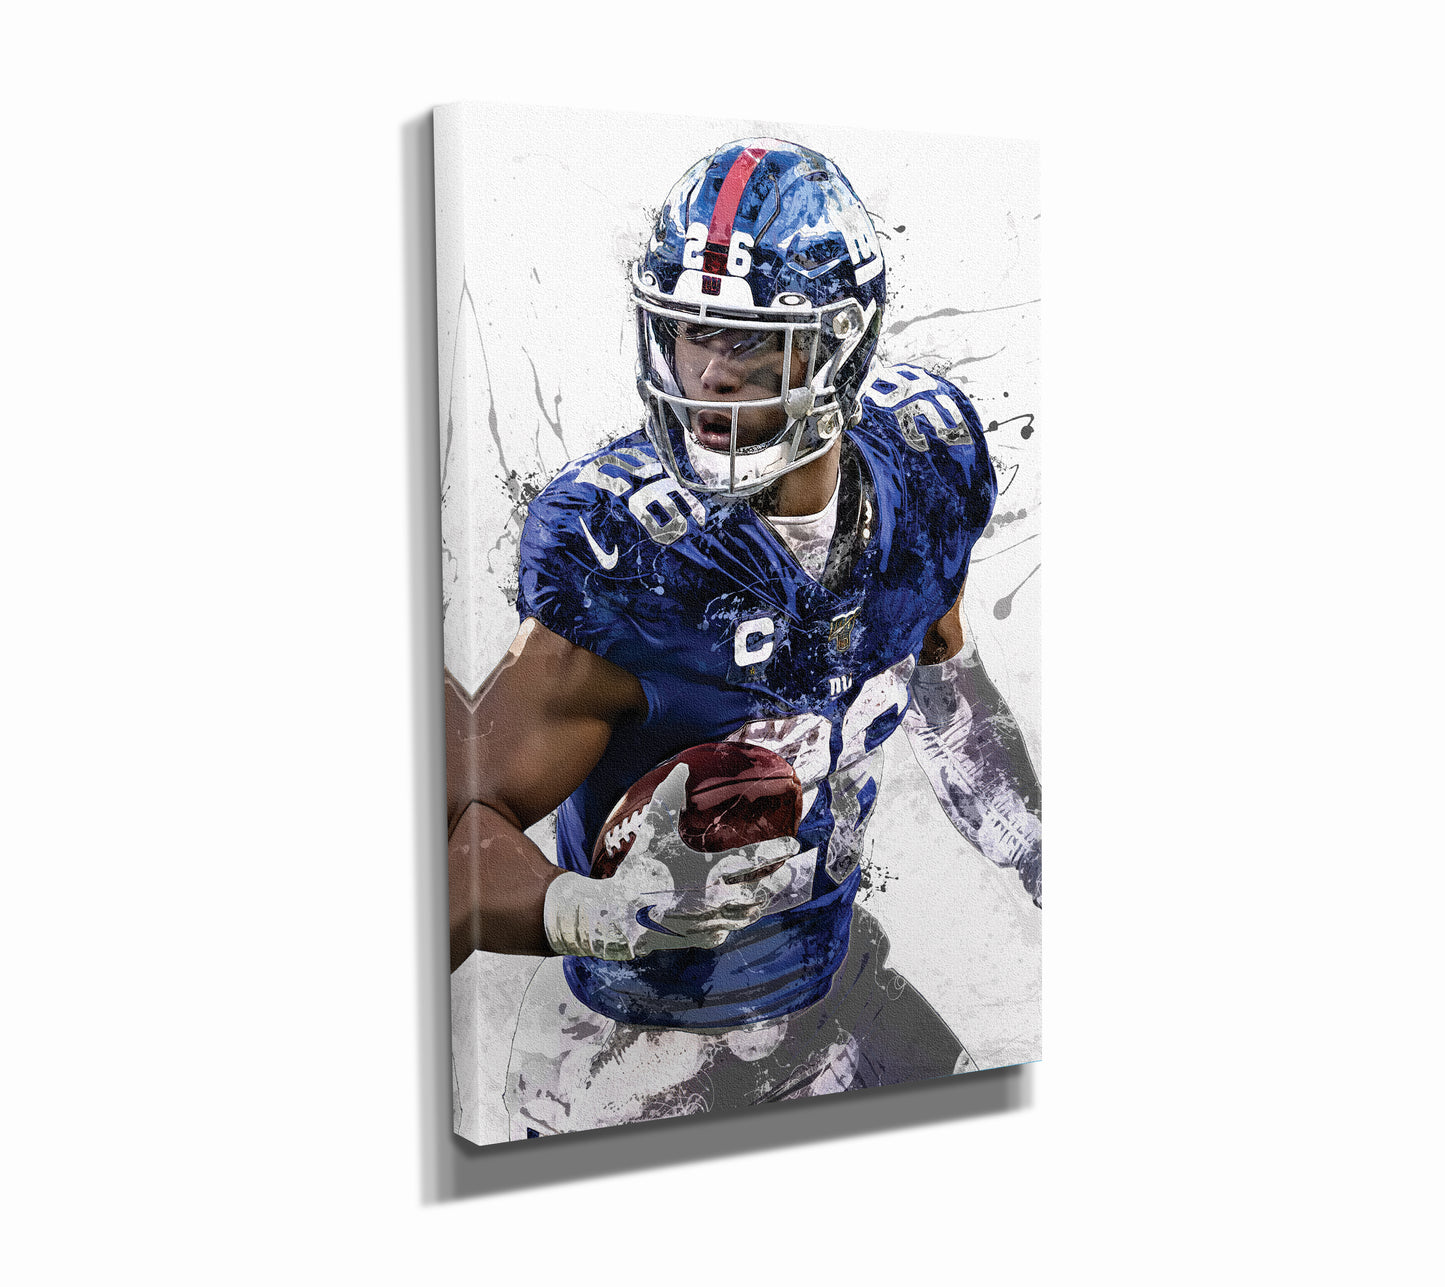 Saquon Barkley Poster New York Giants Football Painting Hand Made Posters Canvas Framed Print Wall Kids Art Man Cave Gift Home Decor